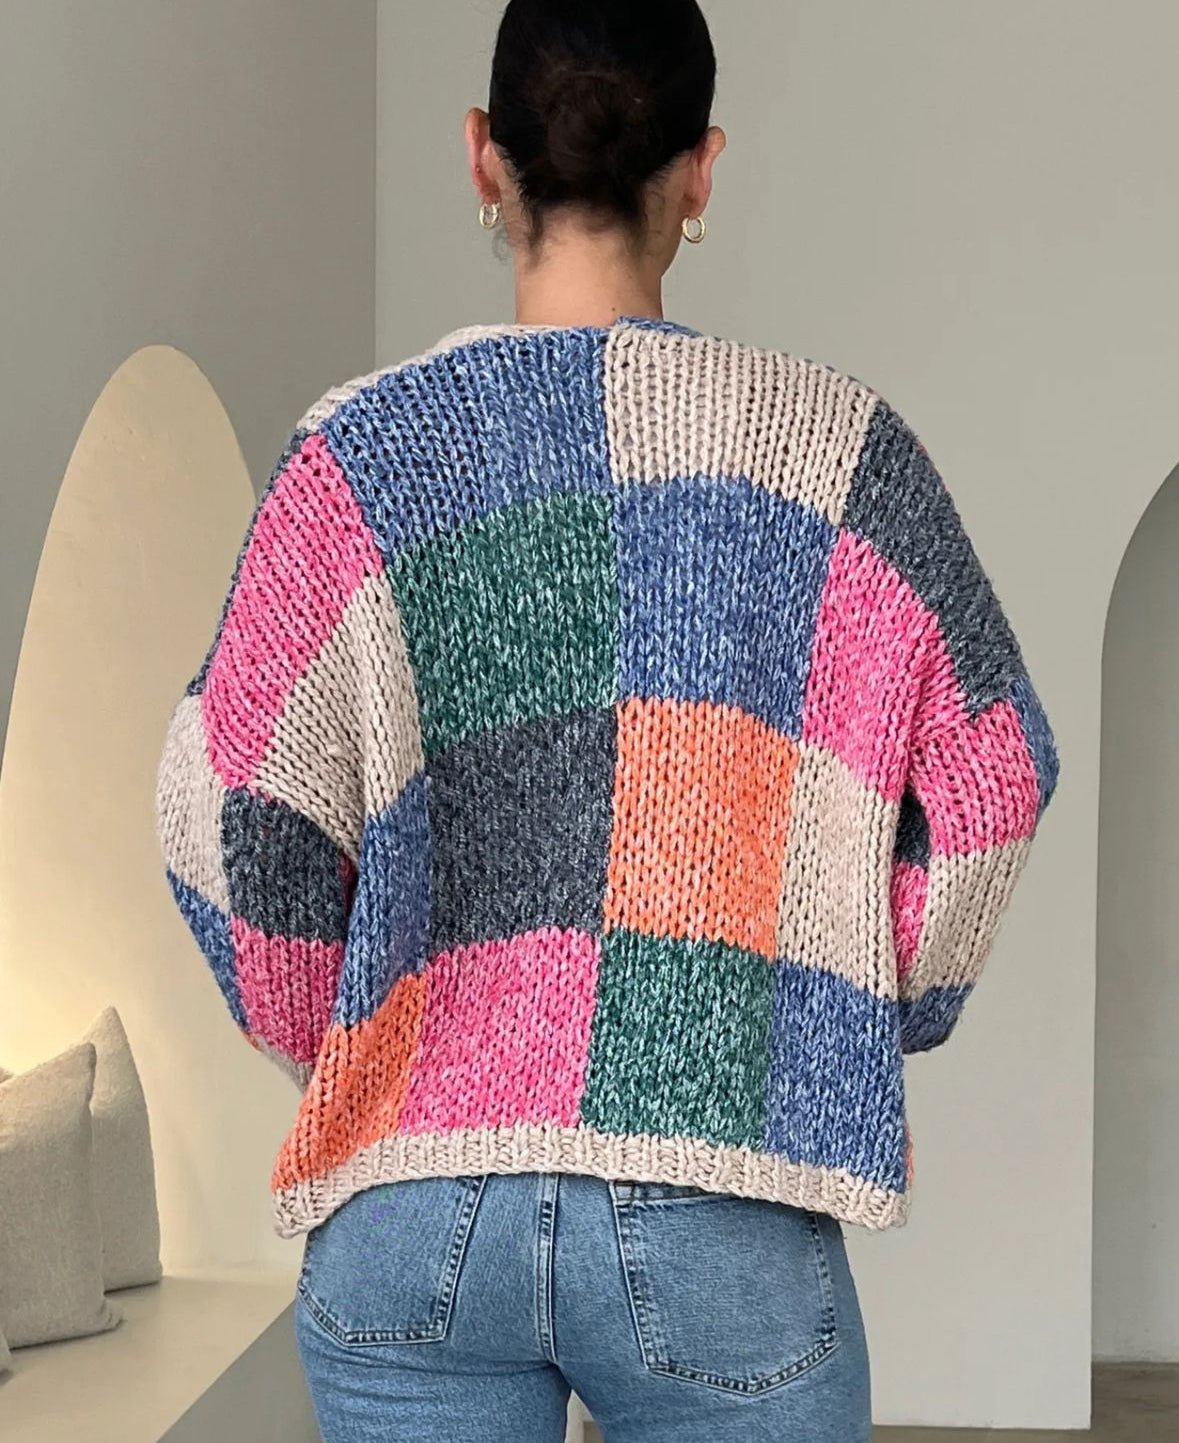 Carrie Knit Cardigan - Something For Me​​